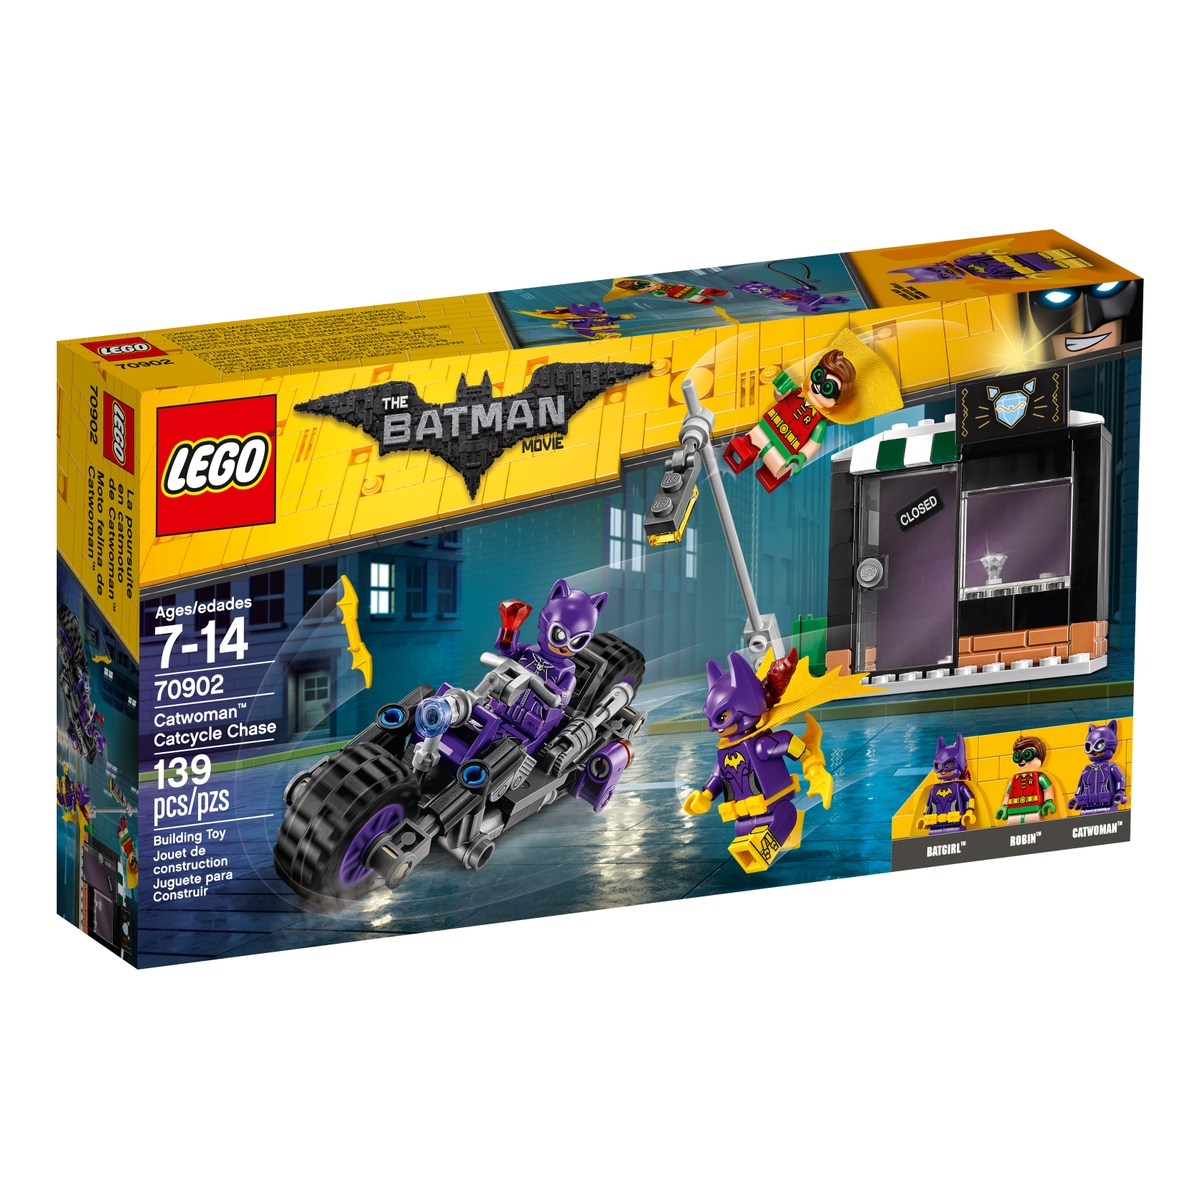 lego 70902 catwoman catcycle chase